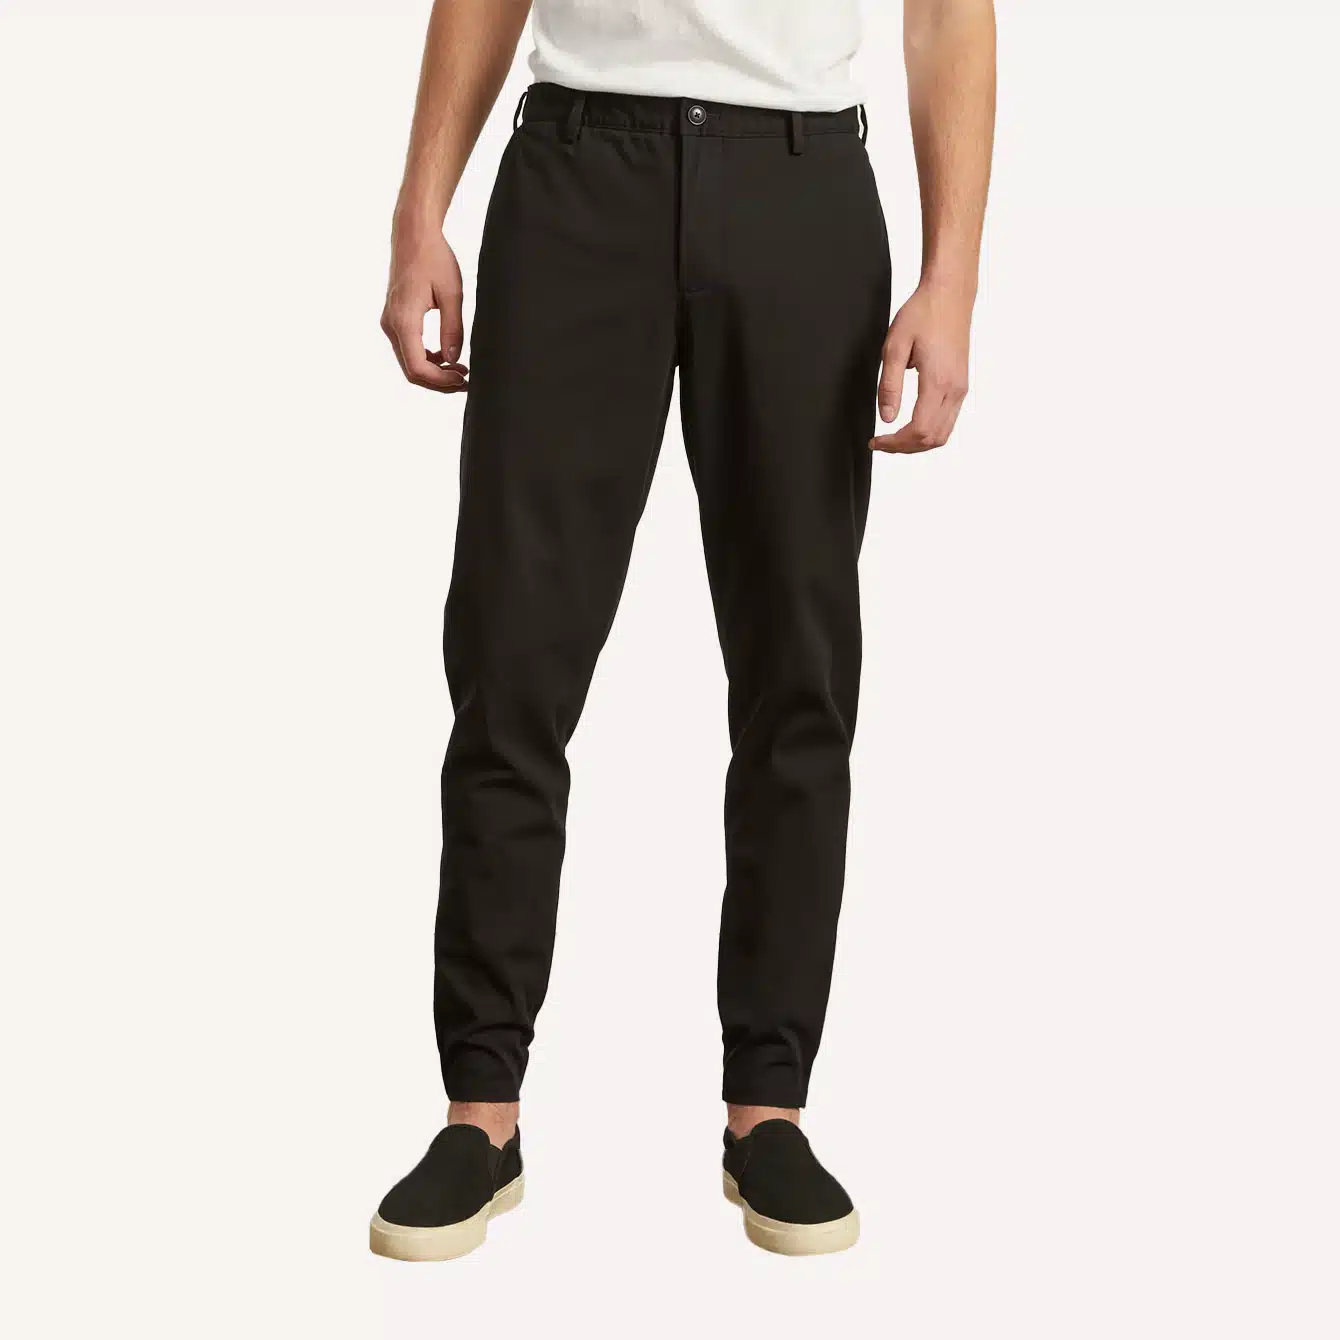 good travel pants for europe